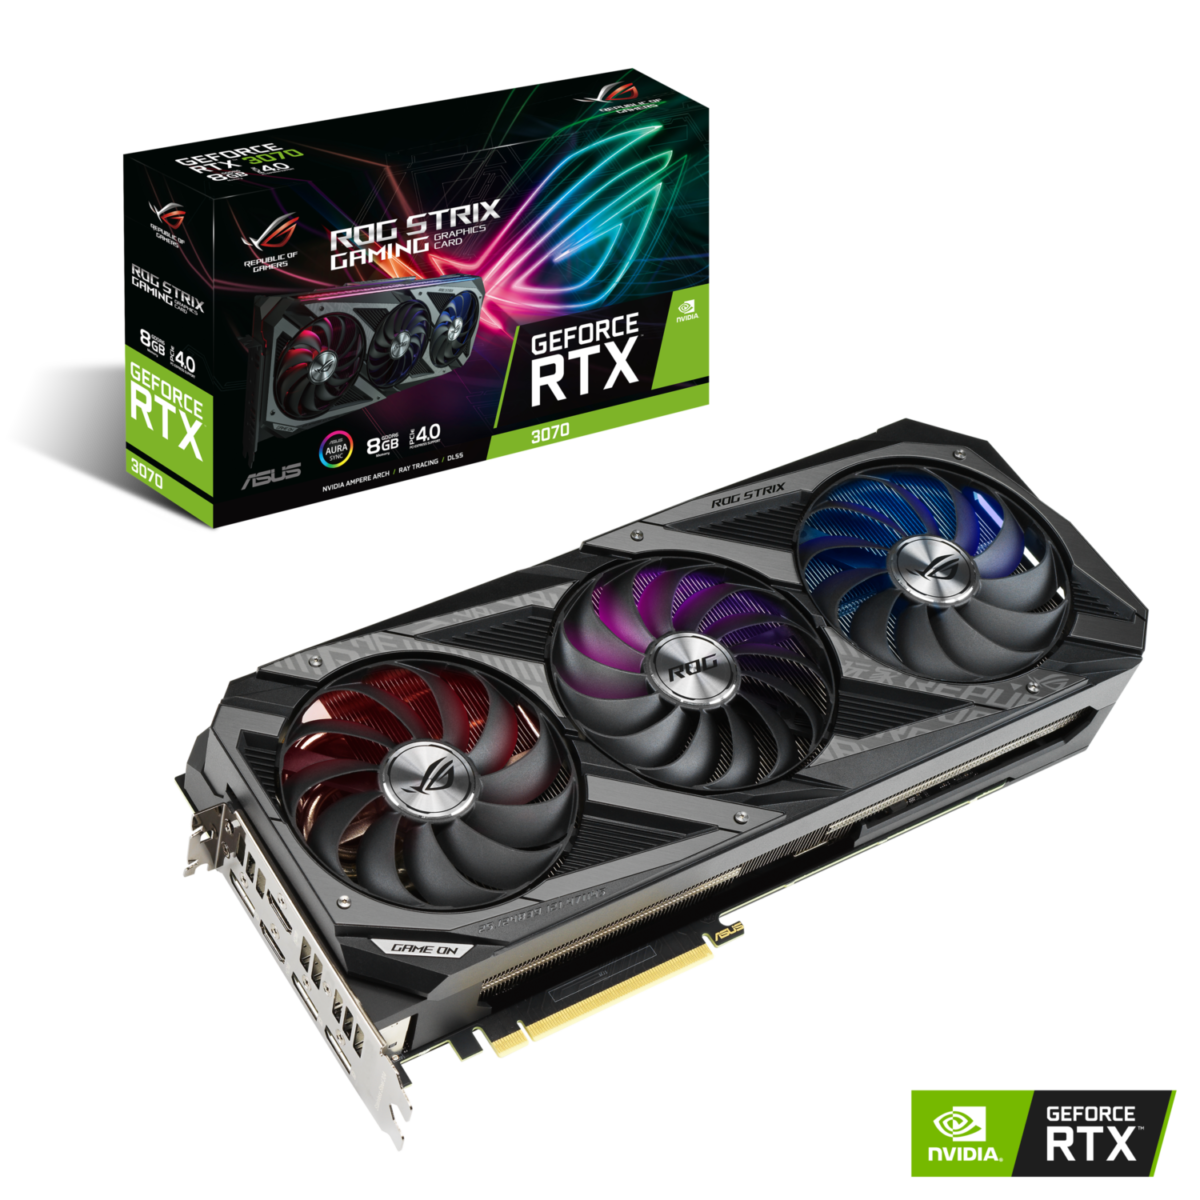 ASUS Announces Price and Availability of ROG Strix, and TUF Gaming RTX 30 Cards -